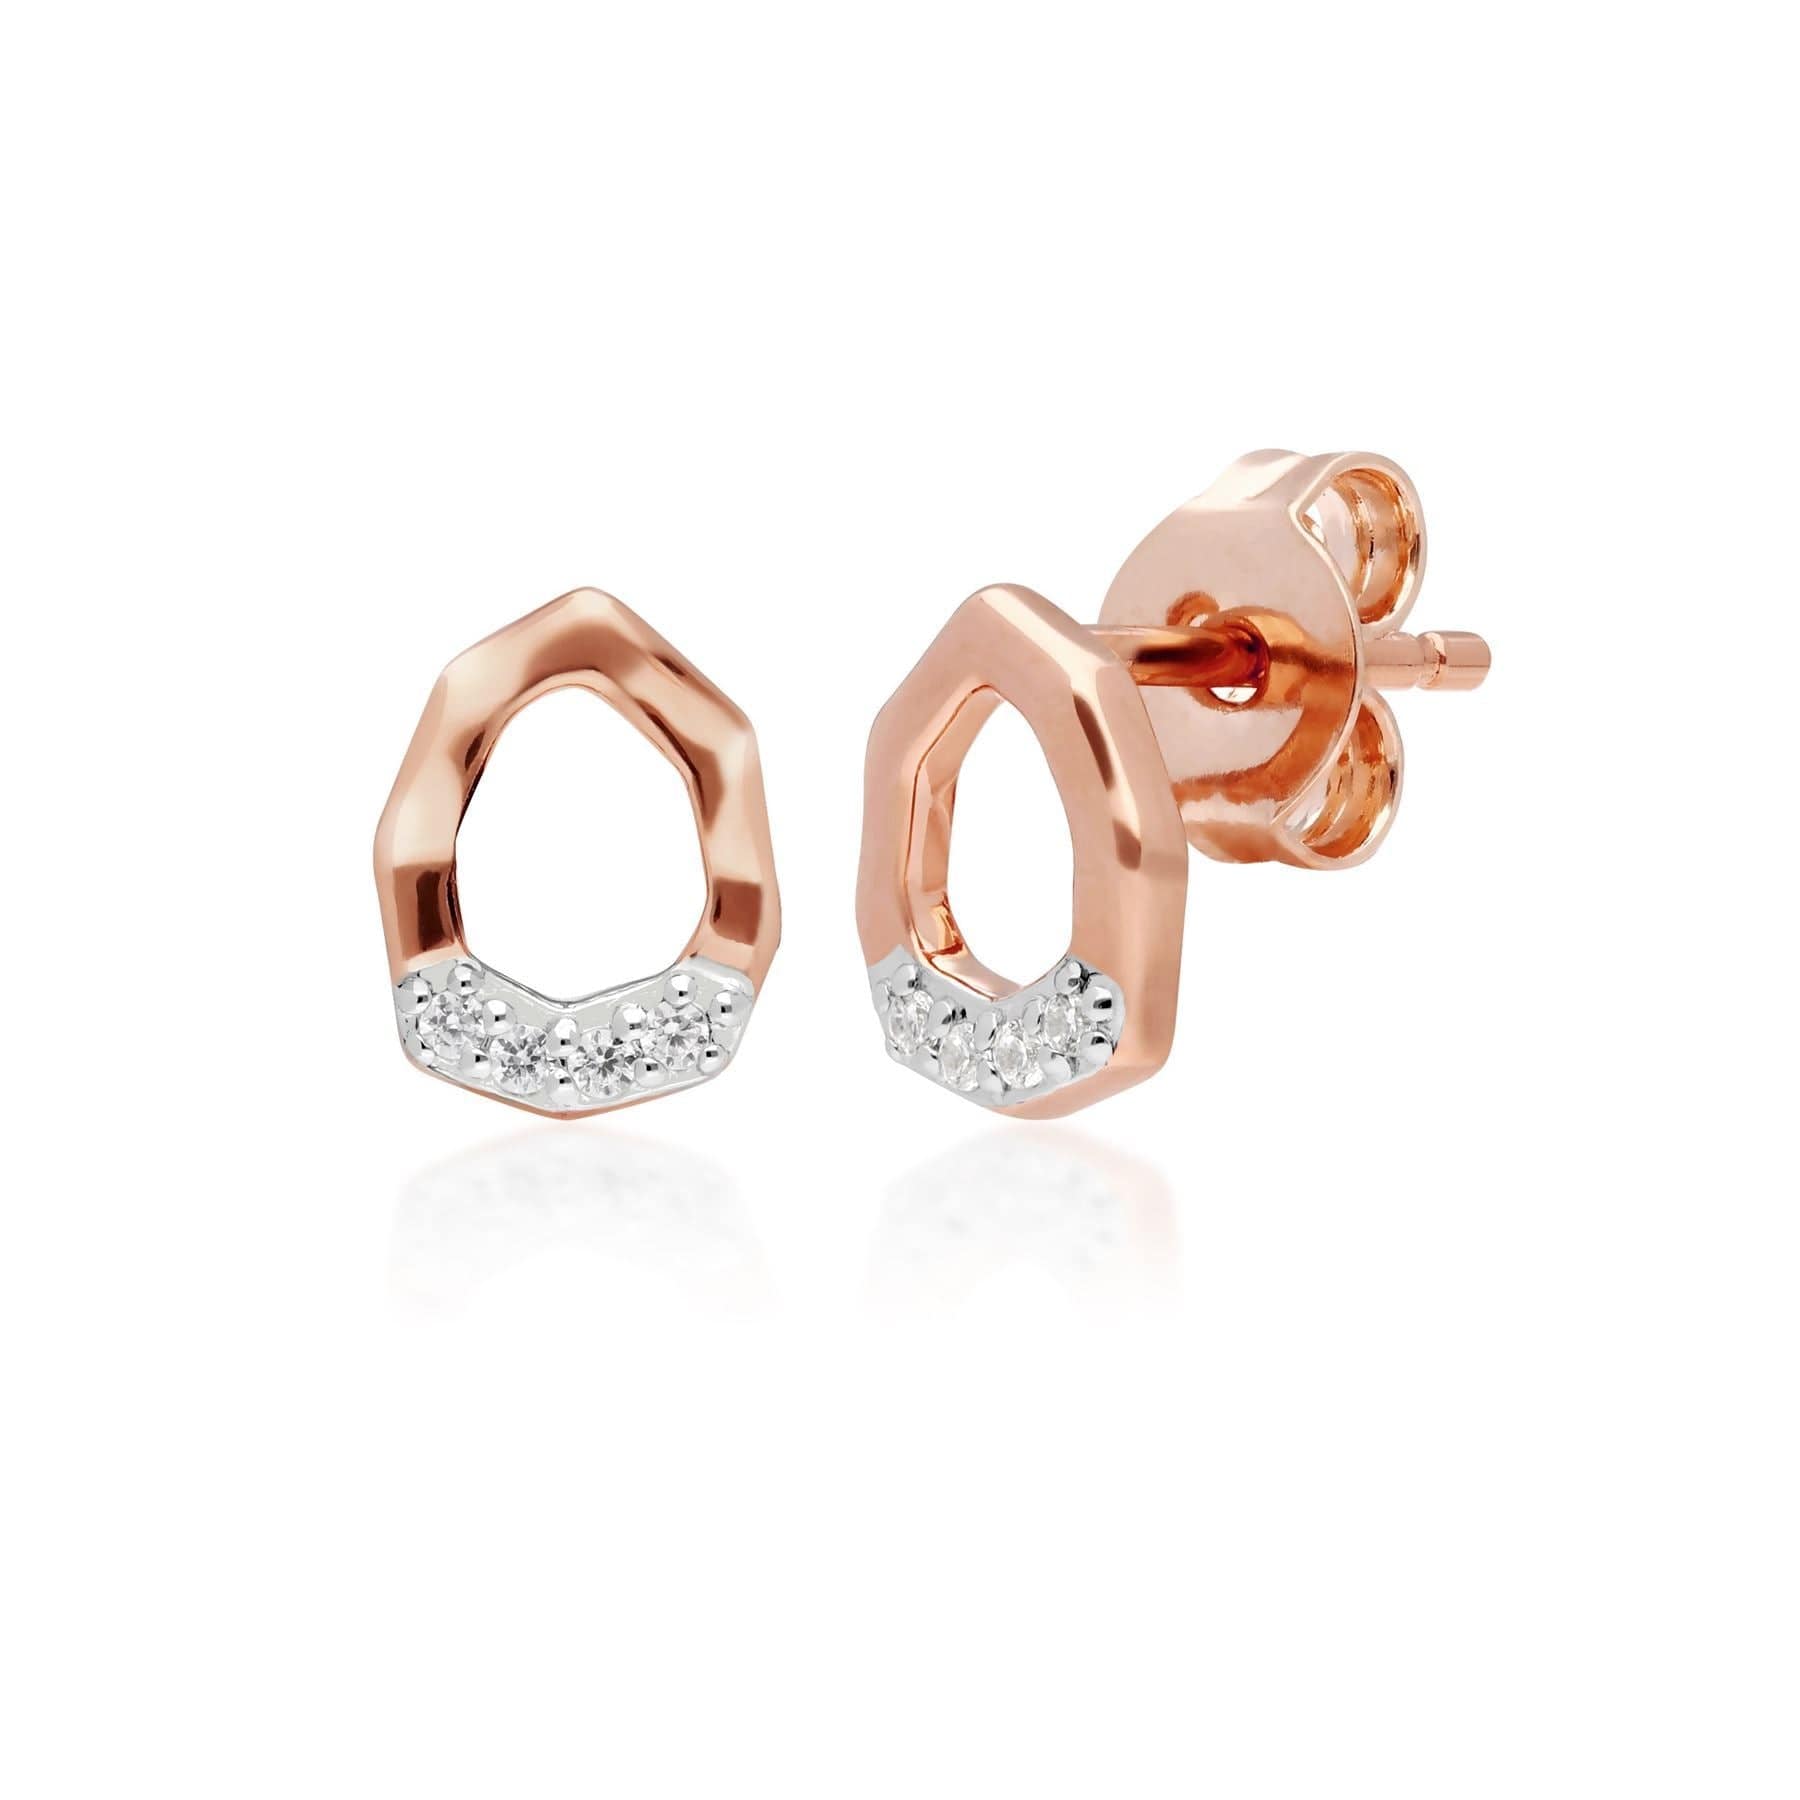 Diamond Pave Asymmetrical Stud Earring Set in 9ct Rose Gold